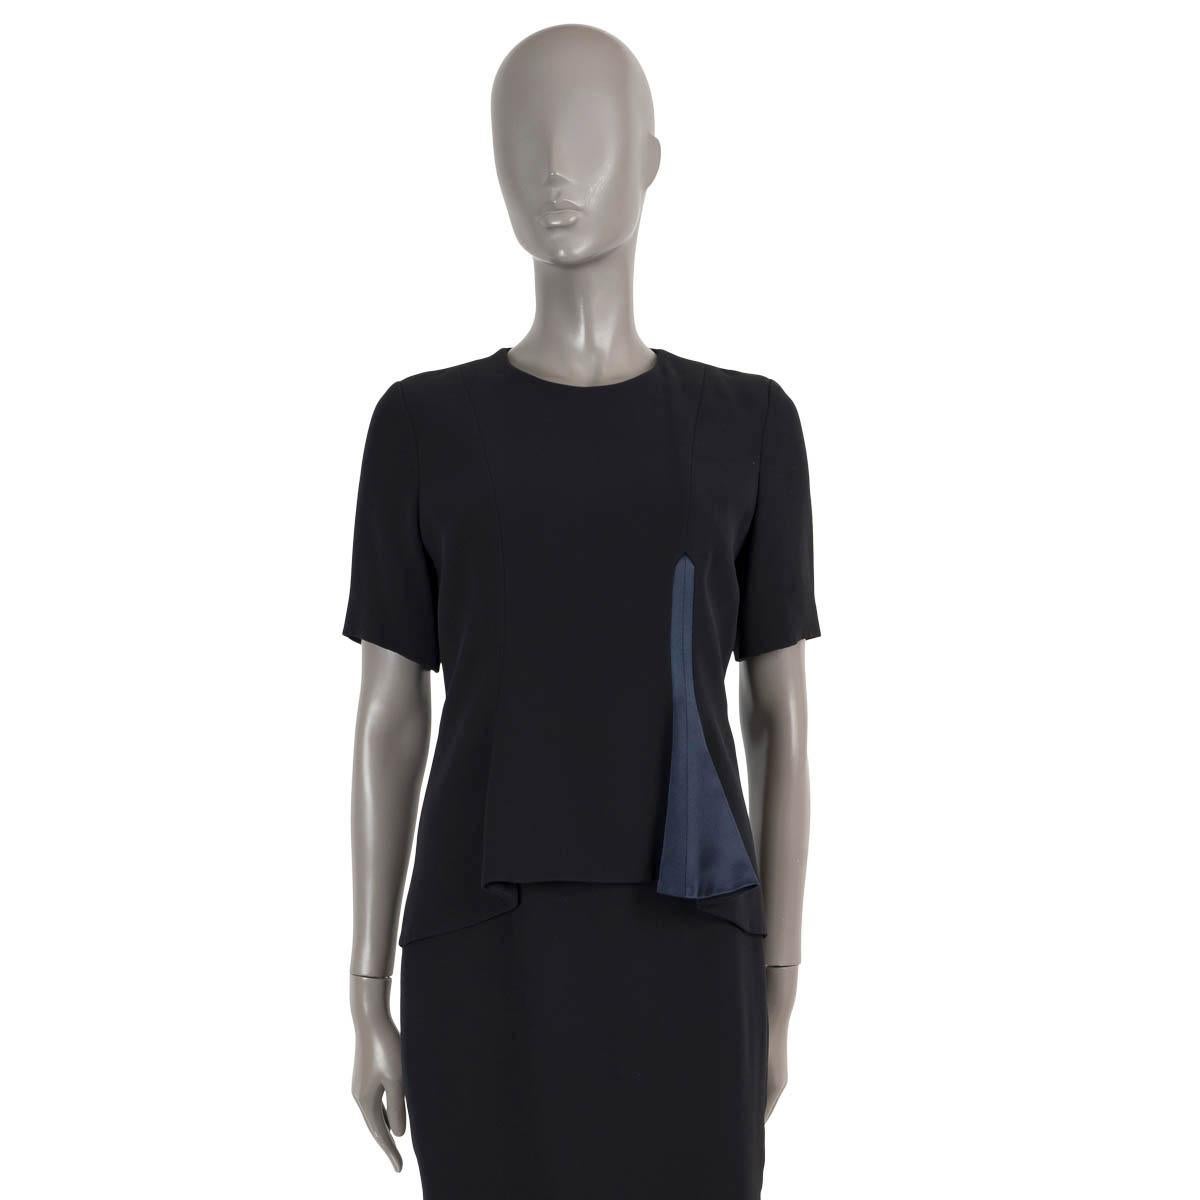 100% authentic Christian Dior short sleeve dress in Midnight Blue silk (100%). Features a round neck and peplum layer on the front with ink blue asymmetric detail. Opens with a concealed zipper in the back and is lined in silk (100%). Has been worn